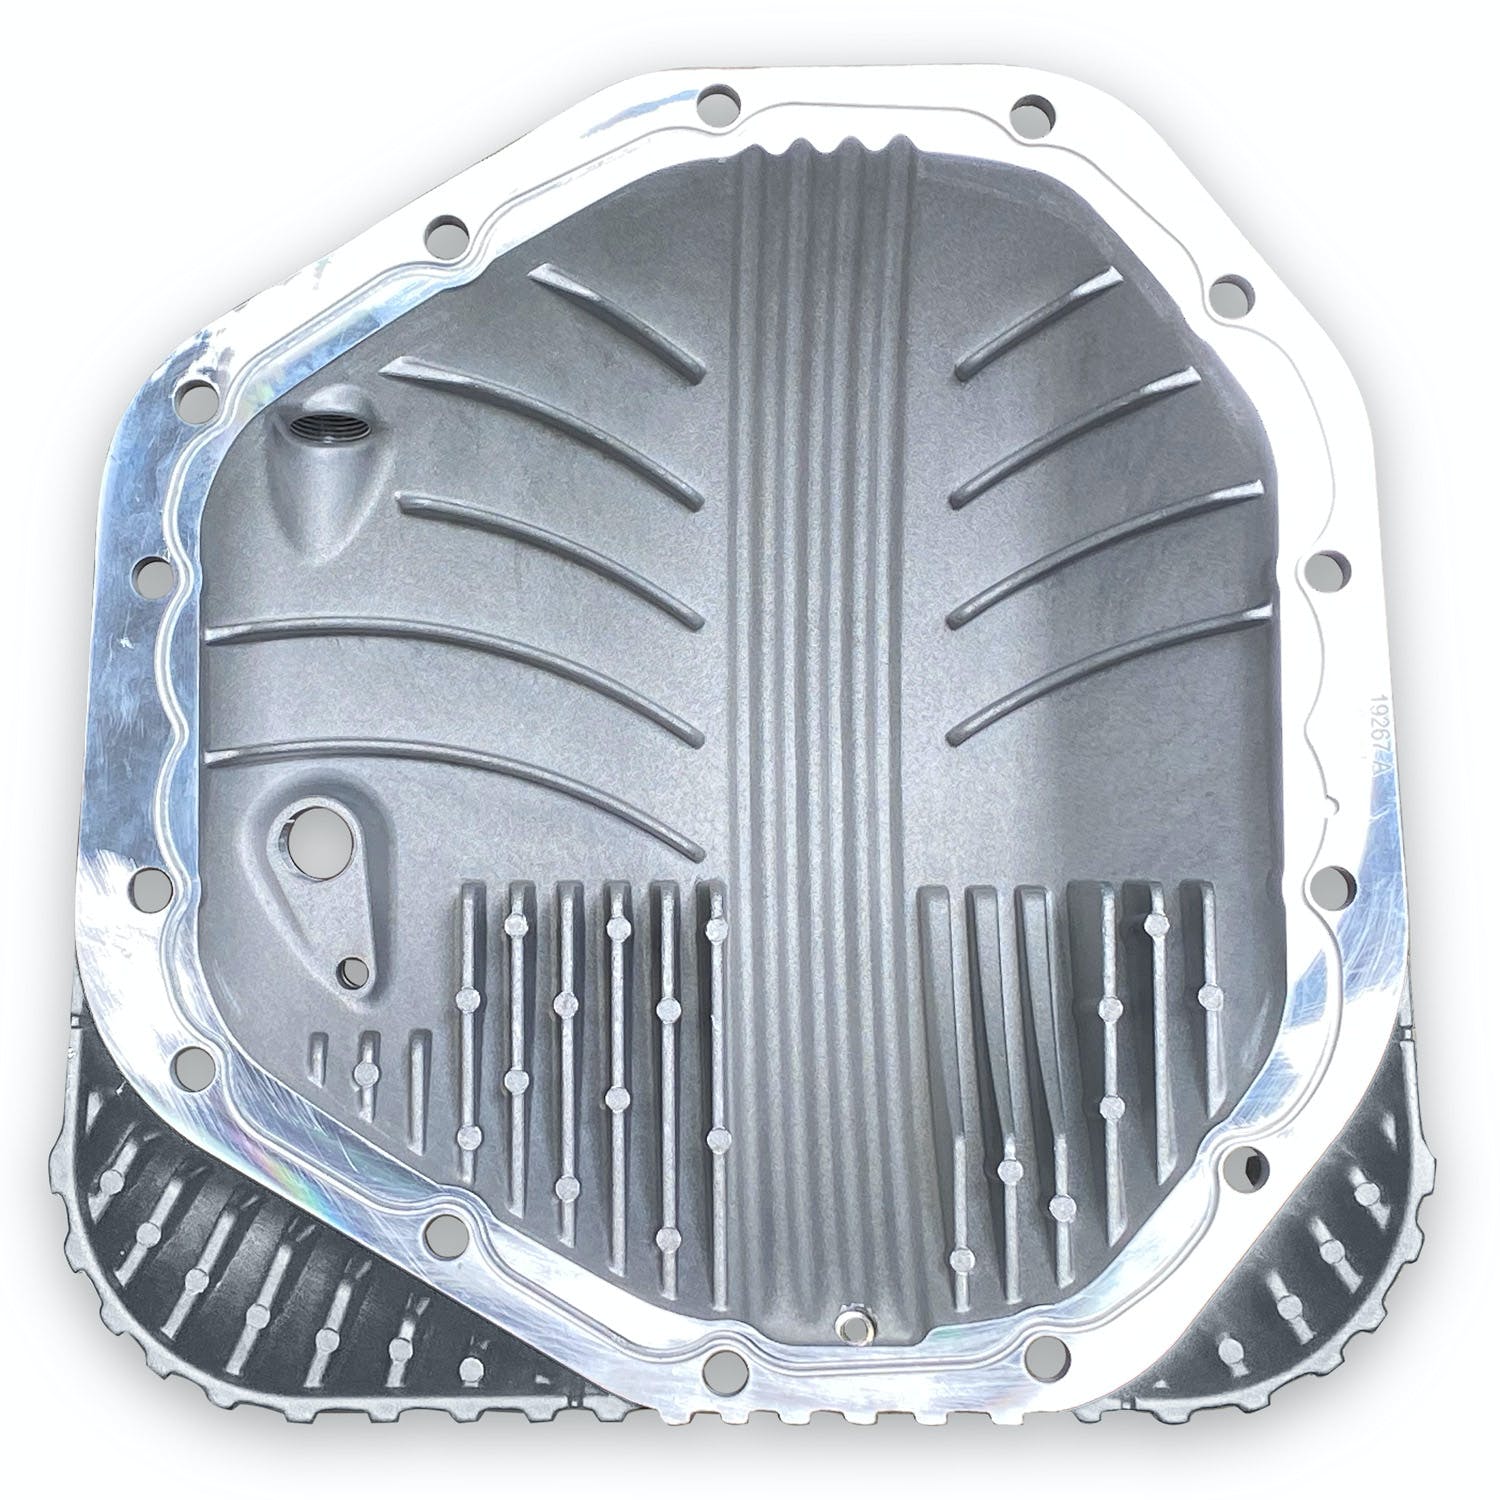 Banks Power 19281 Ram-Air® Differential Cover Kit